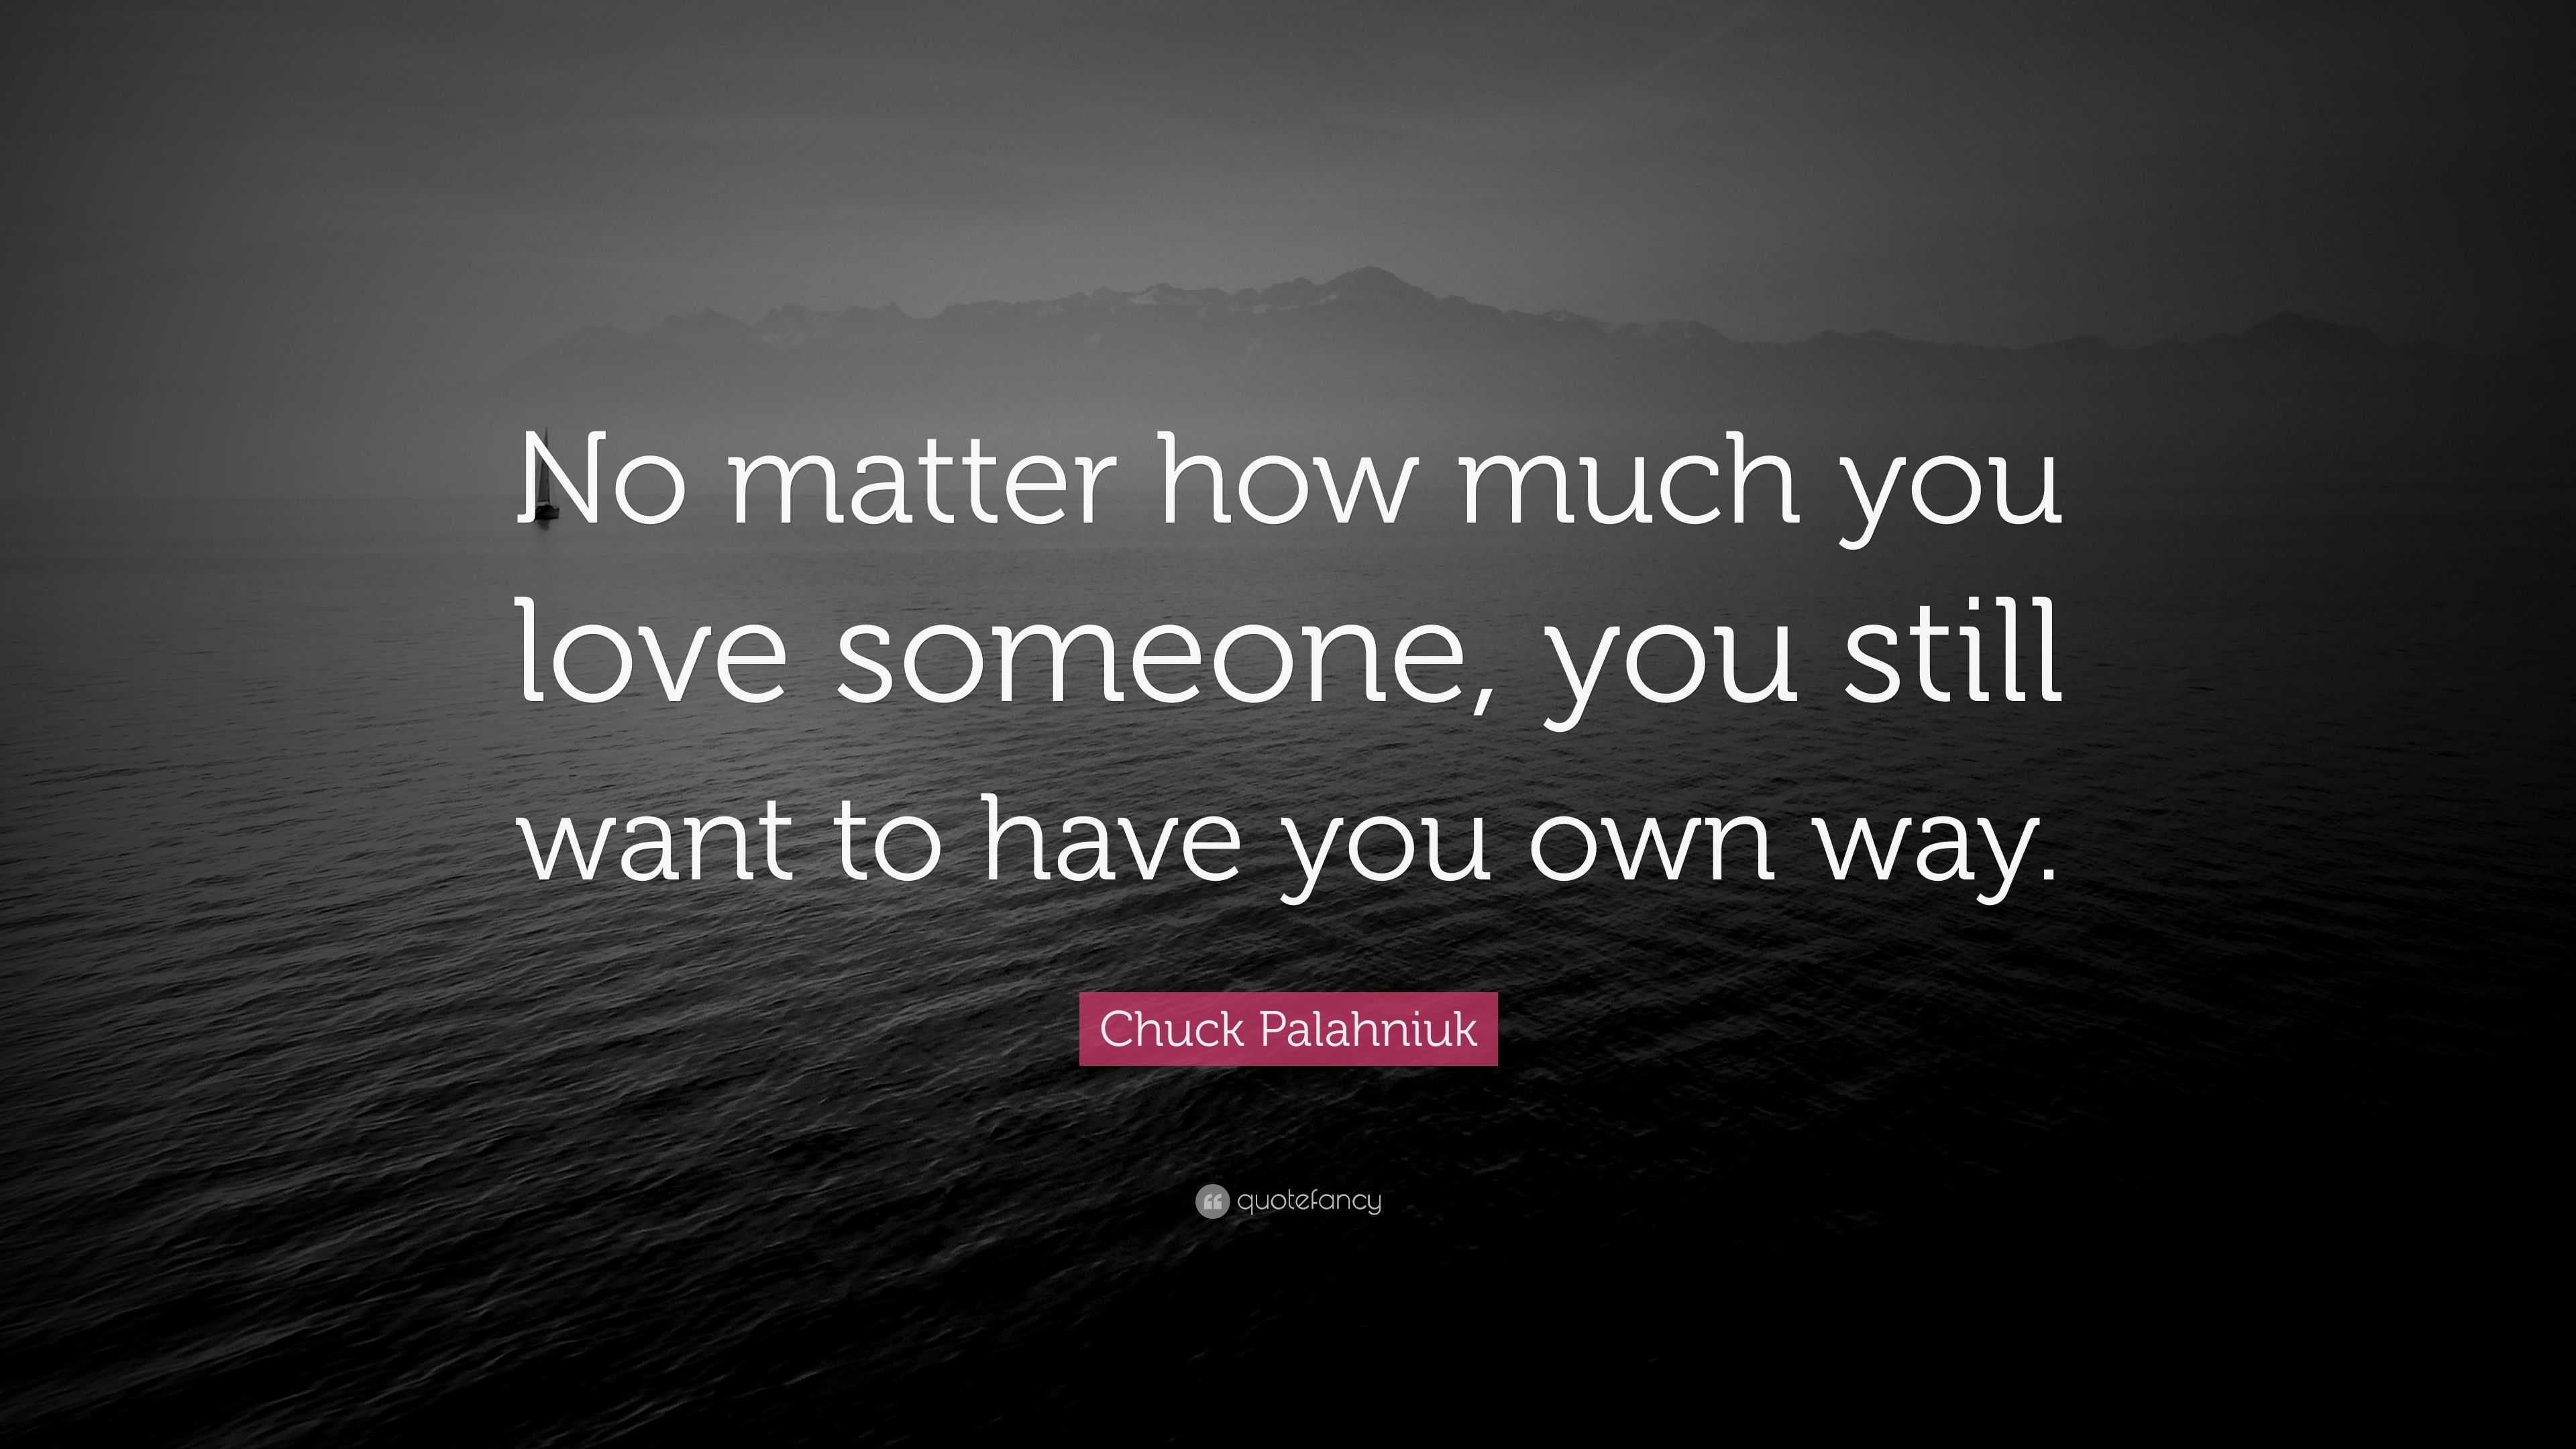 Chuck Palahniuk Quote “No matter how much you love someone you still want